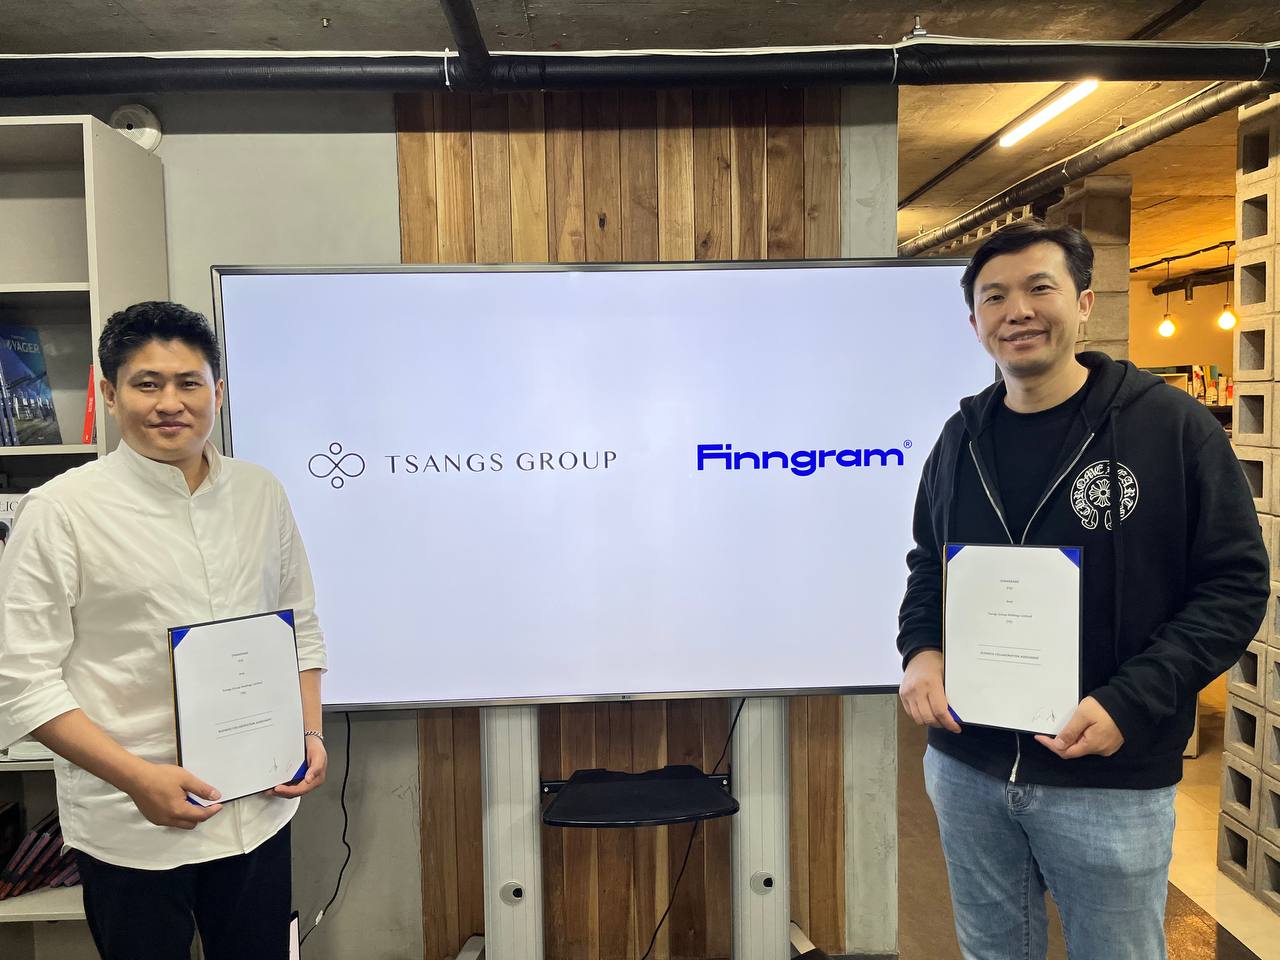 An MoU was signed between Tsangs Group and Finngram in Korea.